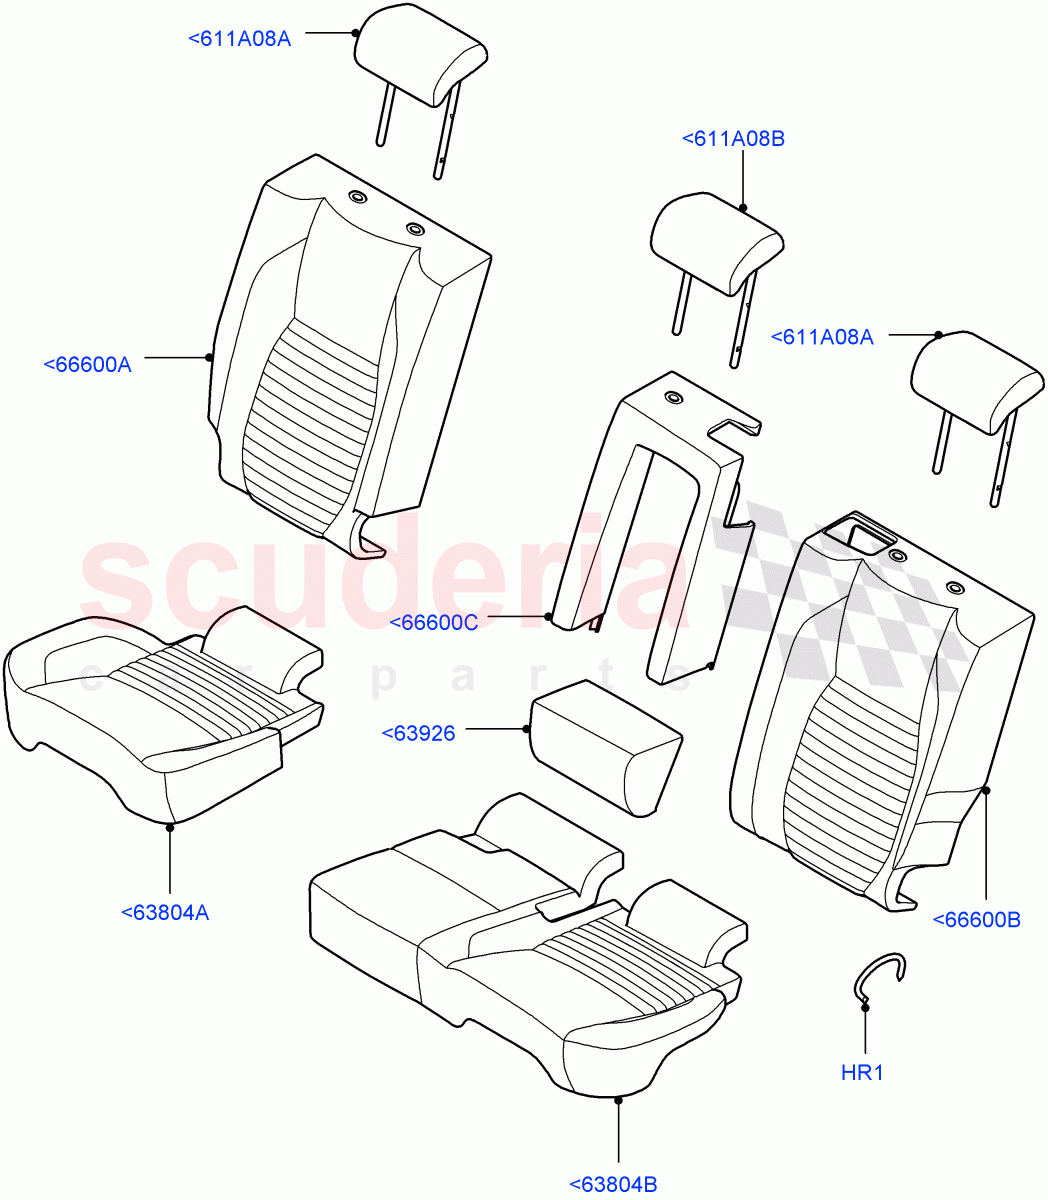 Rear Seat Covers(Taurus Leather Perforated,Itatiaia (Brazil),60/40 Load Through With Slide)((V)FROMLT000001) of Land Rover Land Rover Discovery Sport (2015+) [2.0 Turbo Diesel AJ21D4]